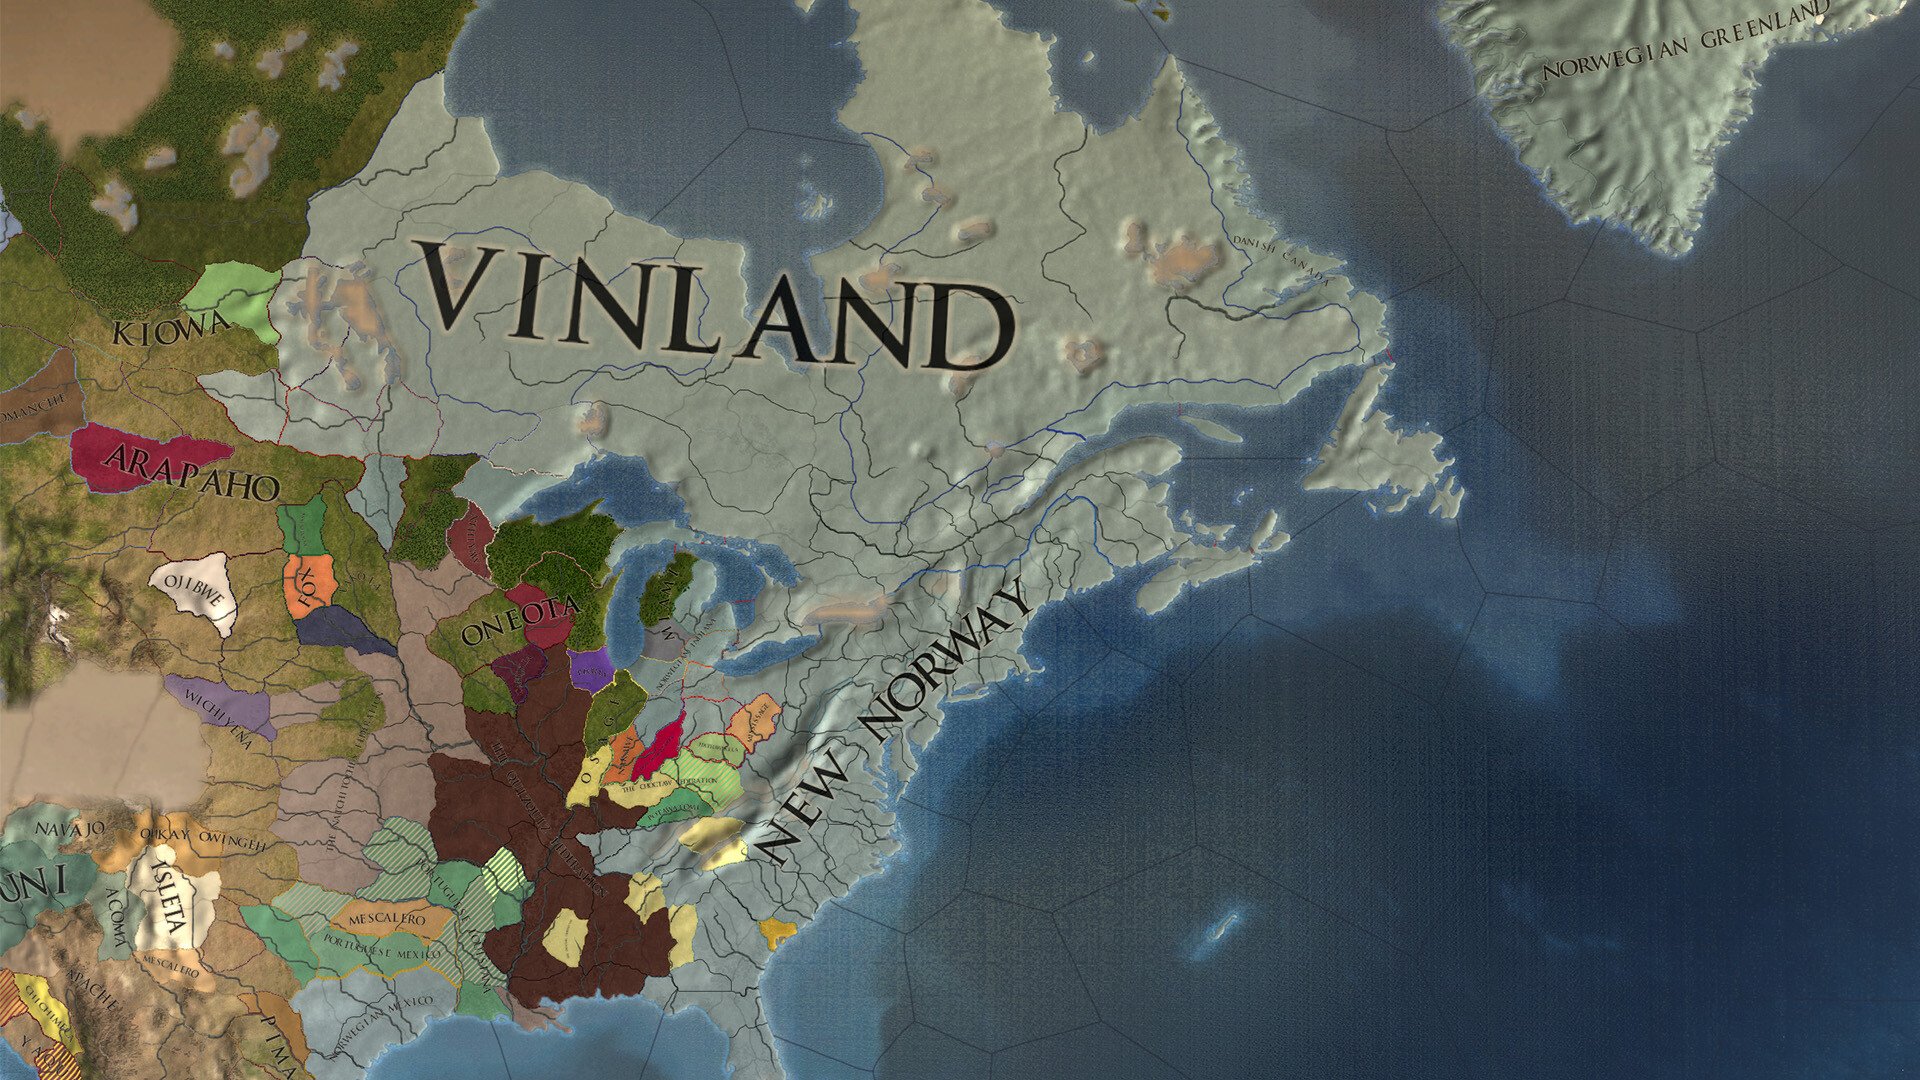 Europa Universalis IV Lions of the North 7